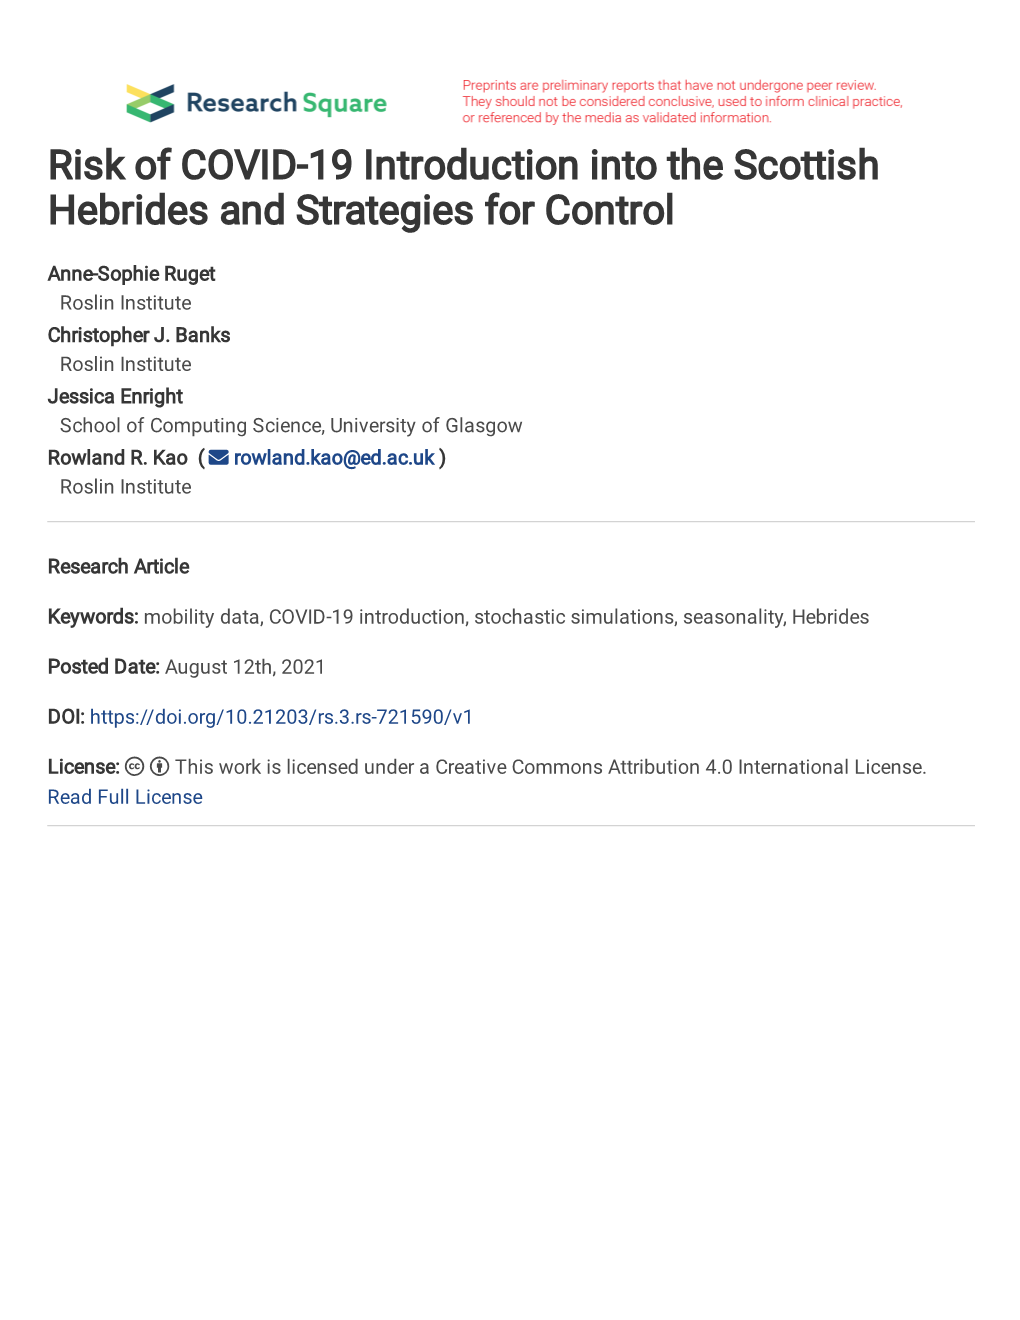 Risk of COVID-19 Introduction Into the Scottish Hebrides and Strategies for Control